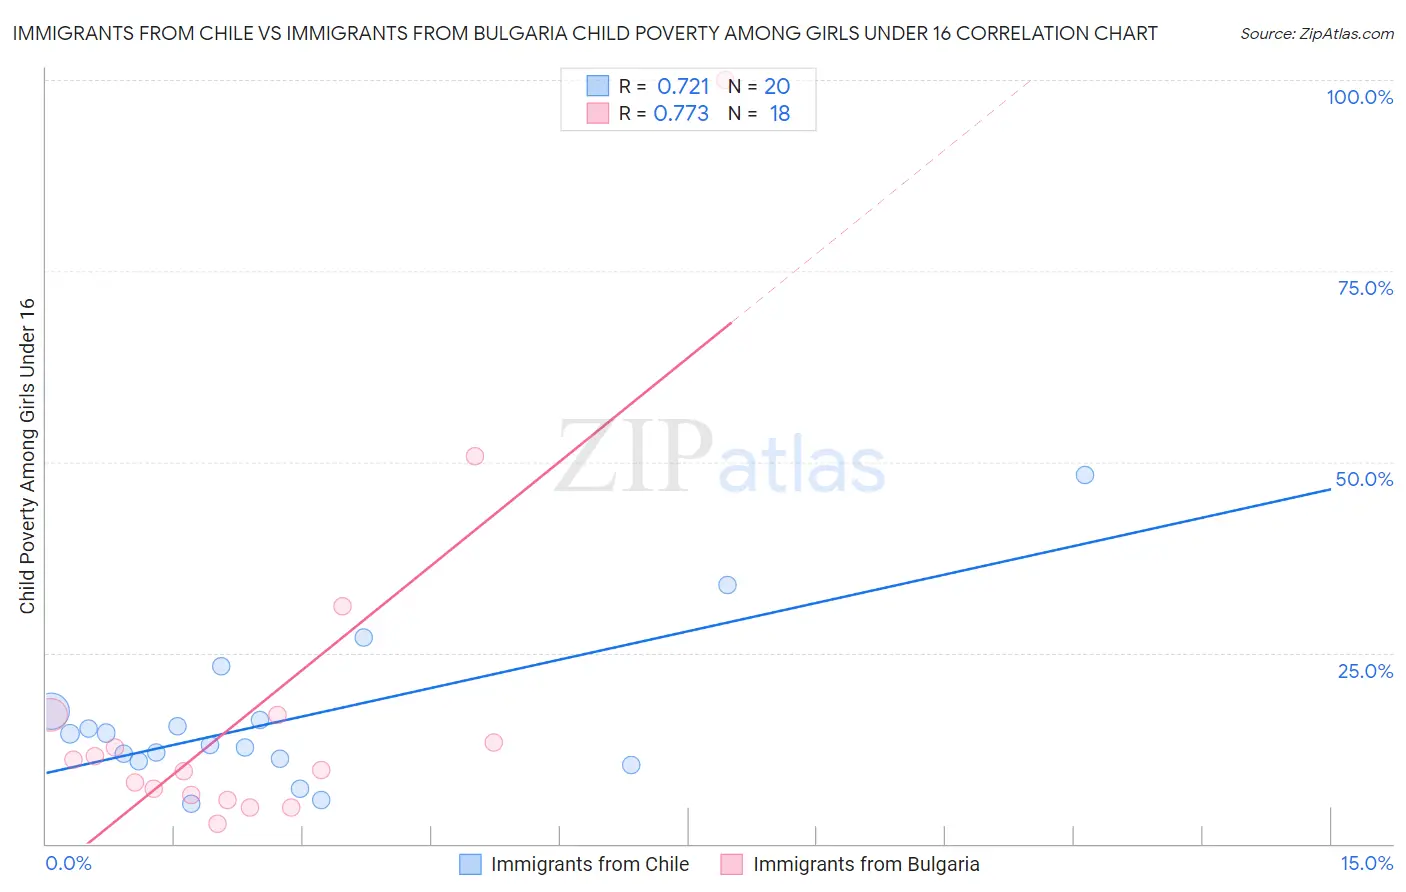 Immigrants from Chile vs Immigrants from Bulgaria Child Poverty Among Girls Under 16